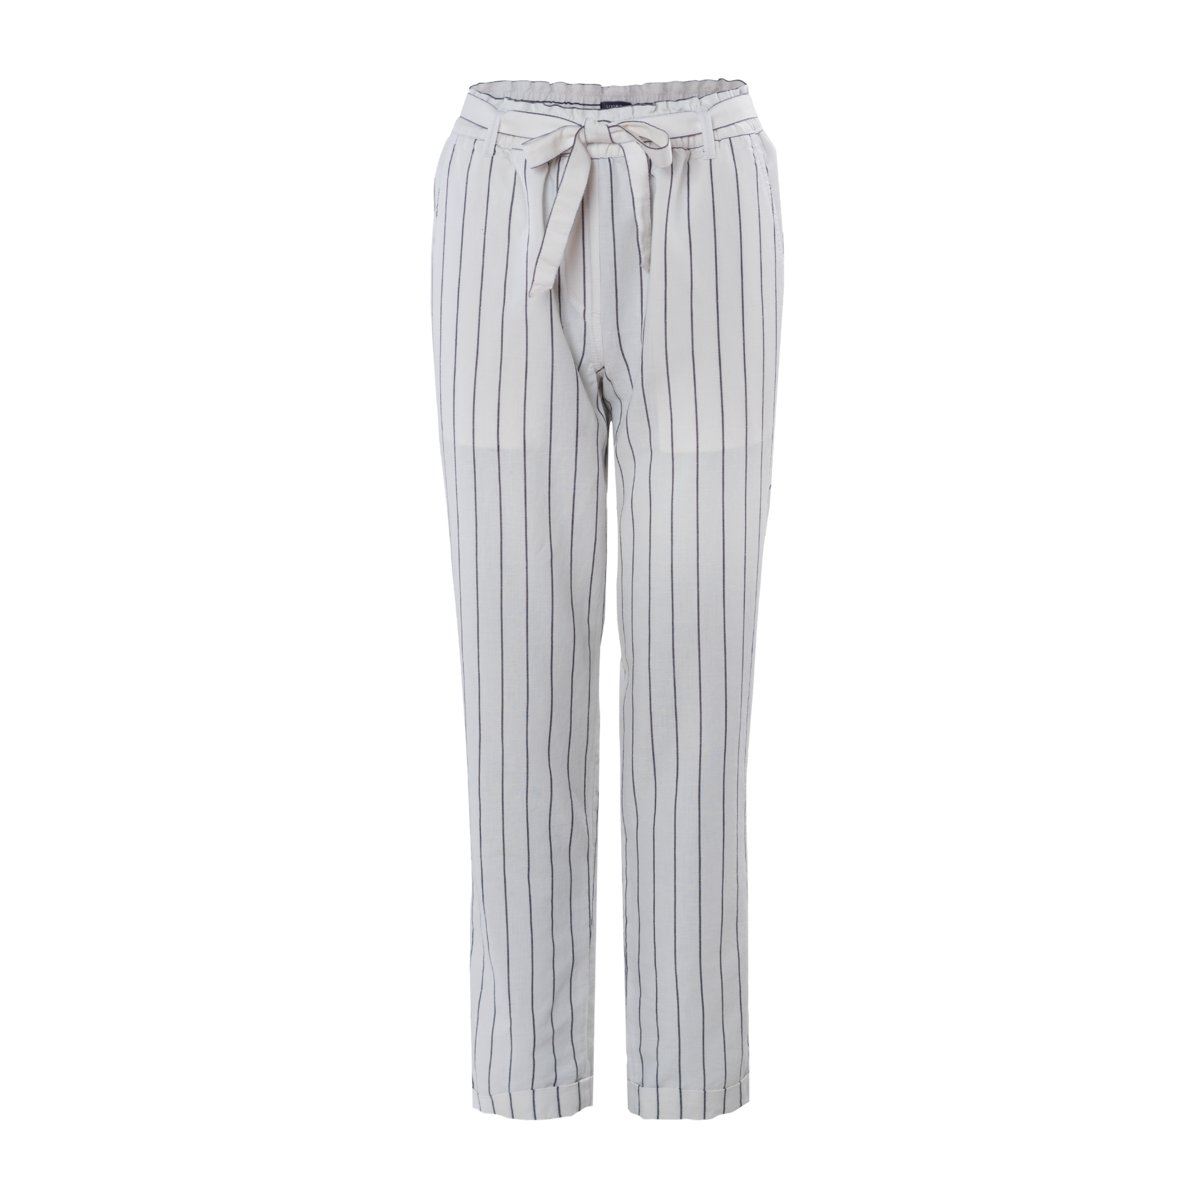 Striped Trousers, GILL